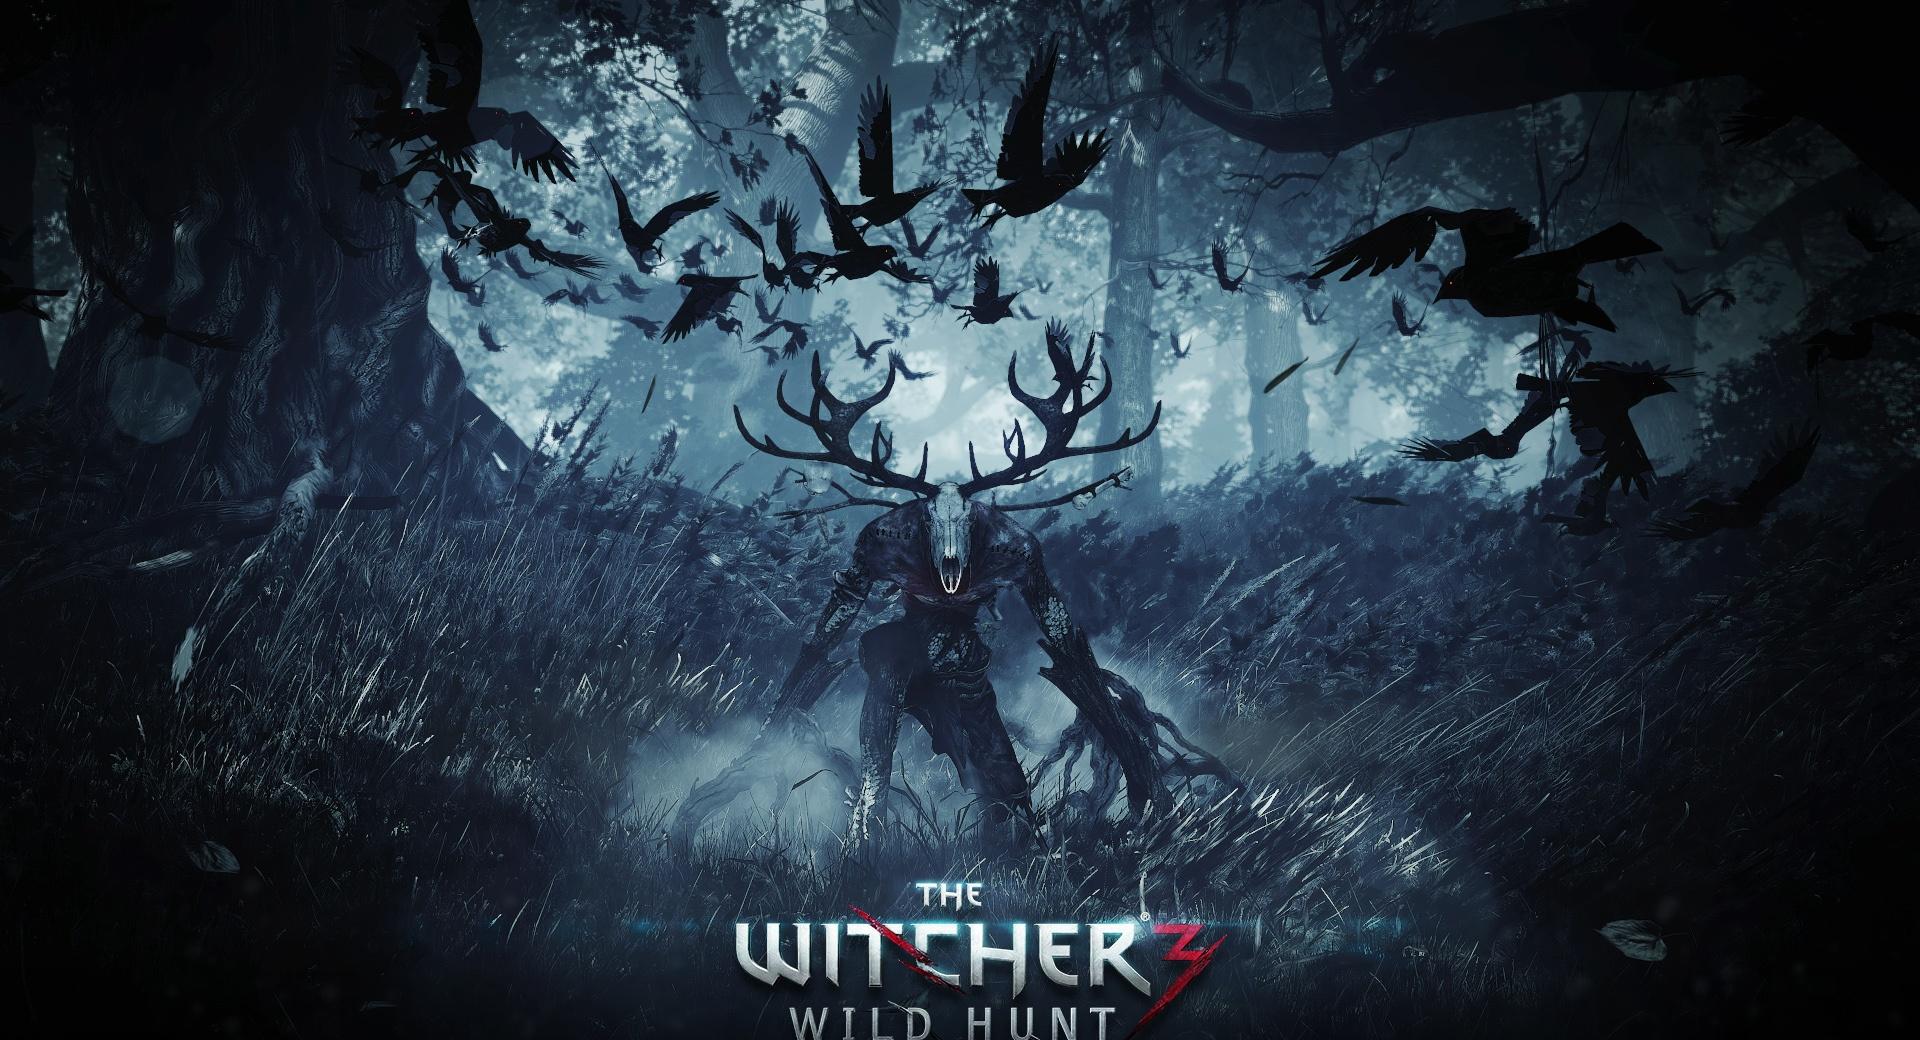 Leshy - The Witcher 3 Wild Hunt wallpapers HD quality